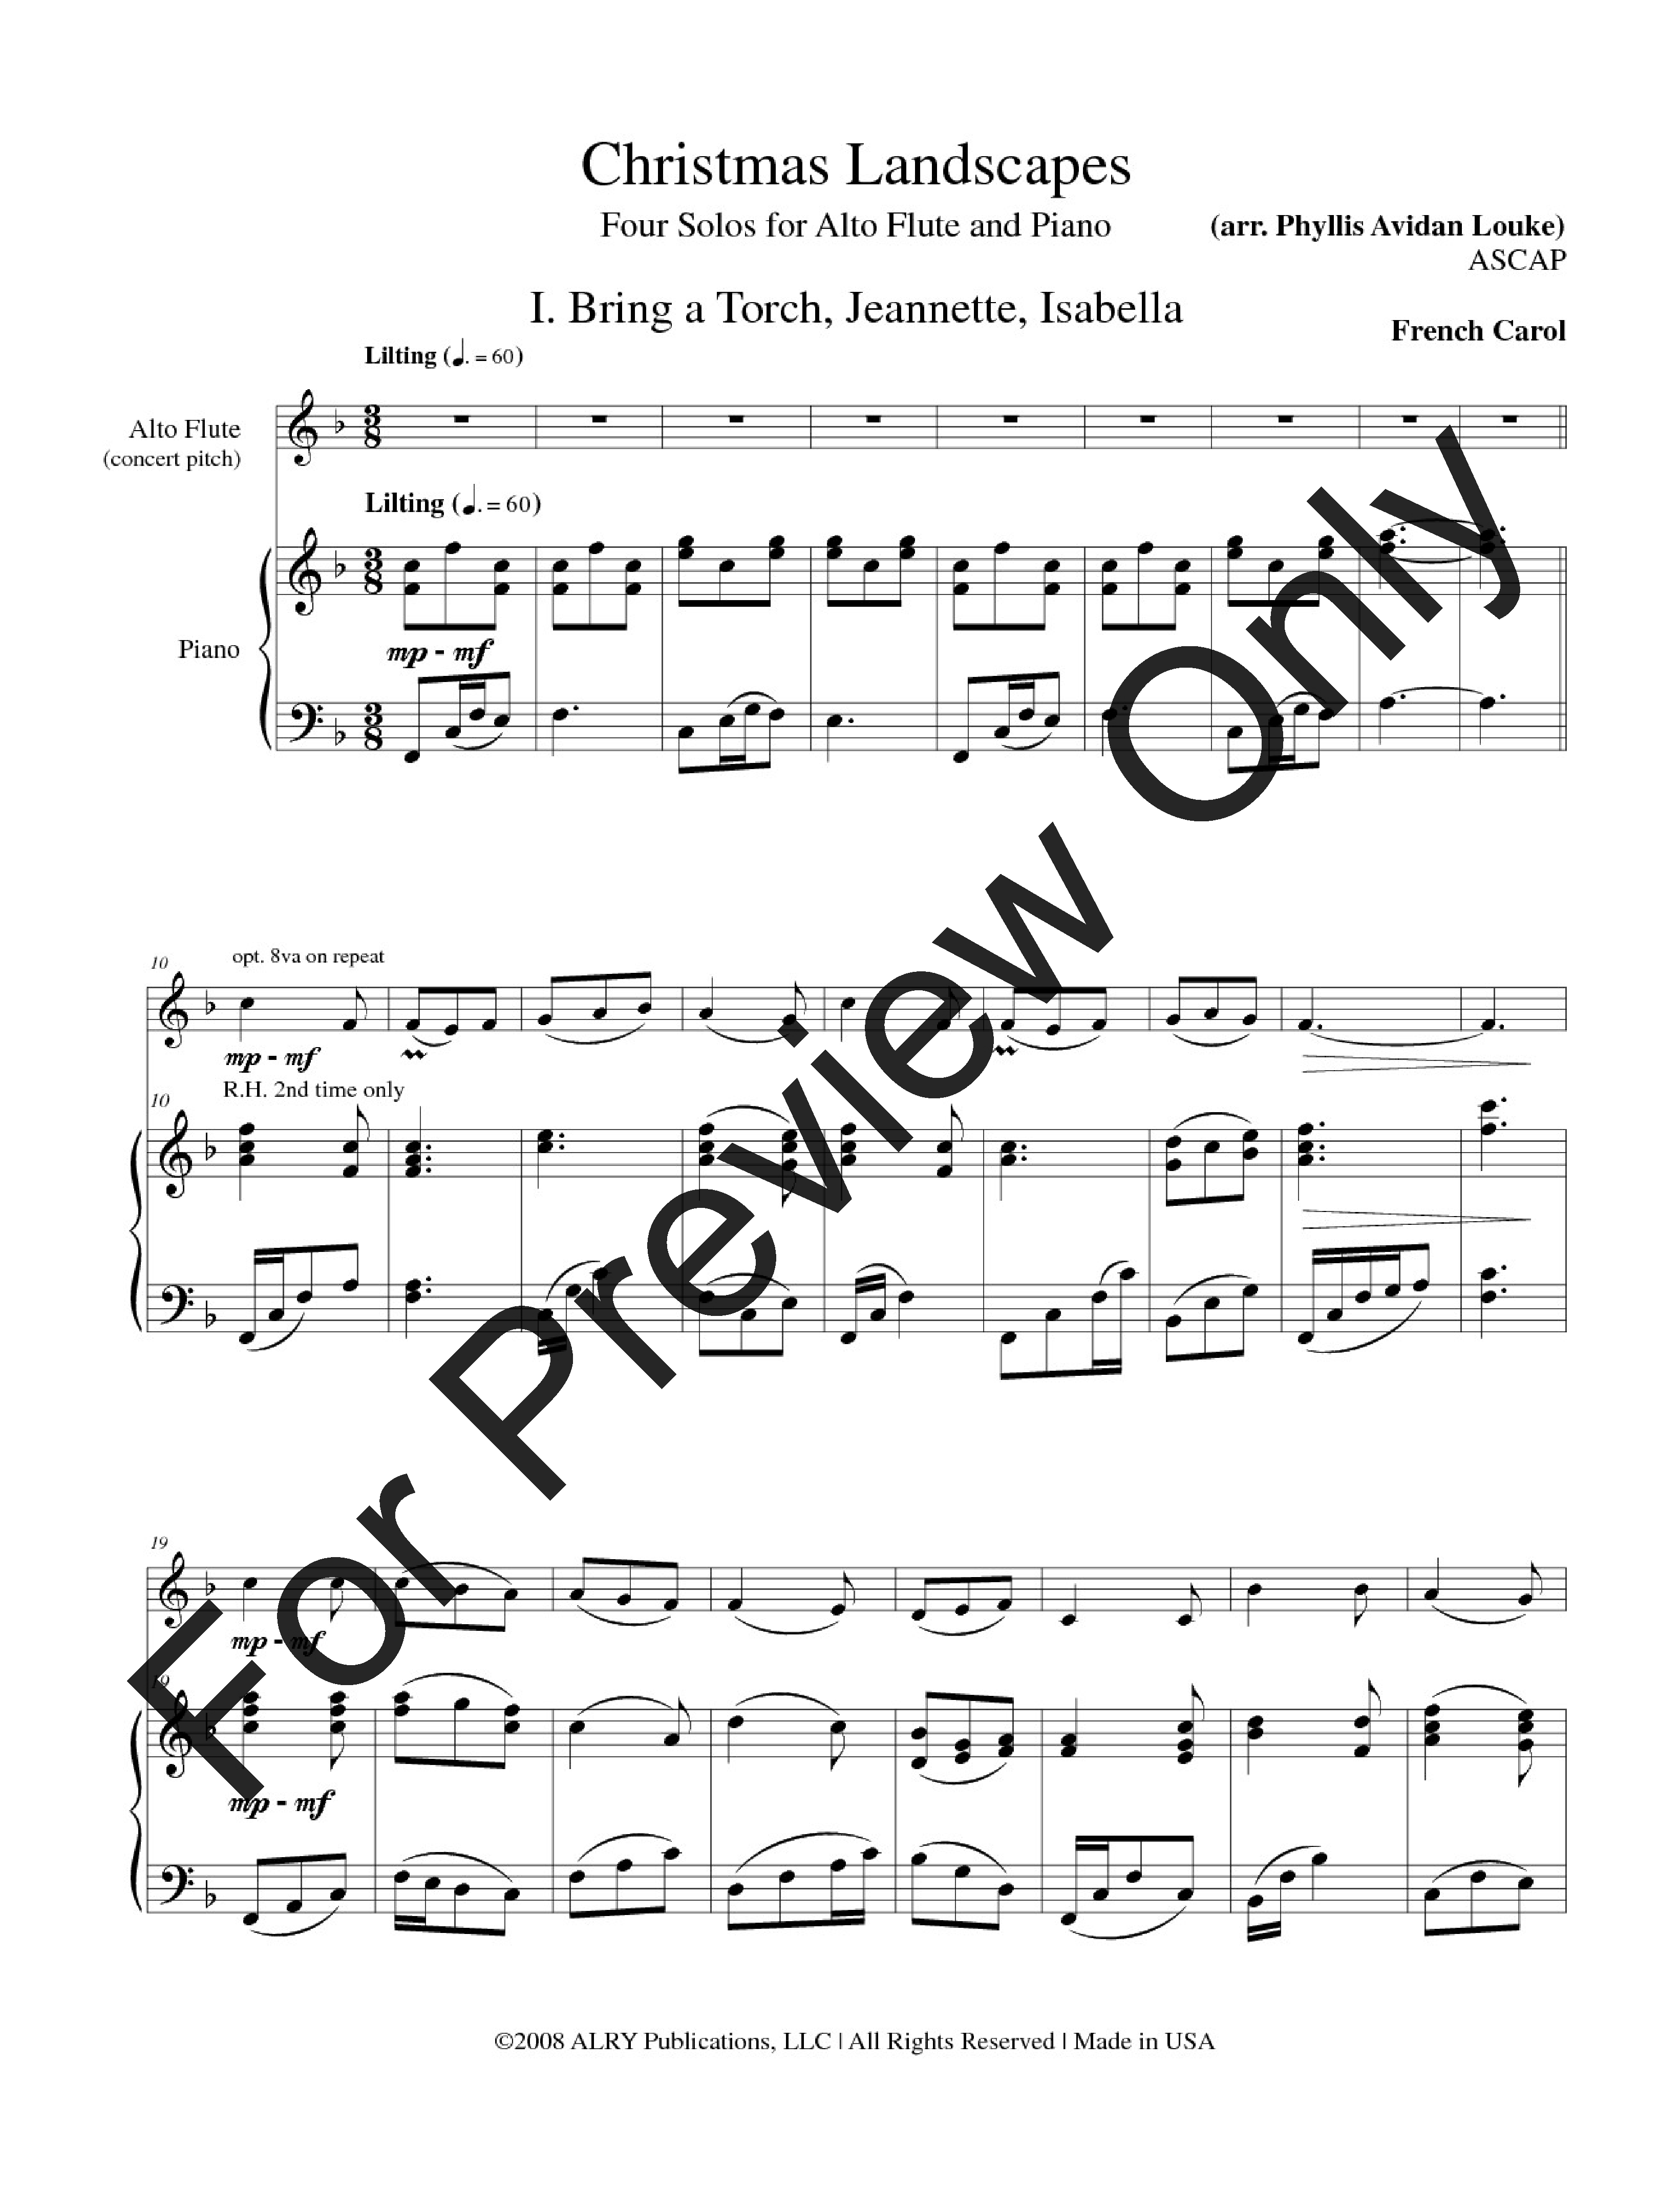 Christmas Landscapes Alto Flute and Piano opt. C flute